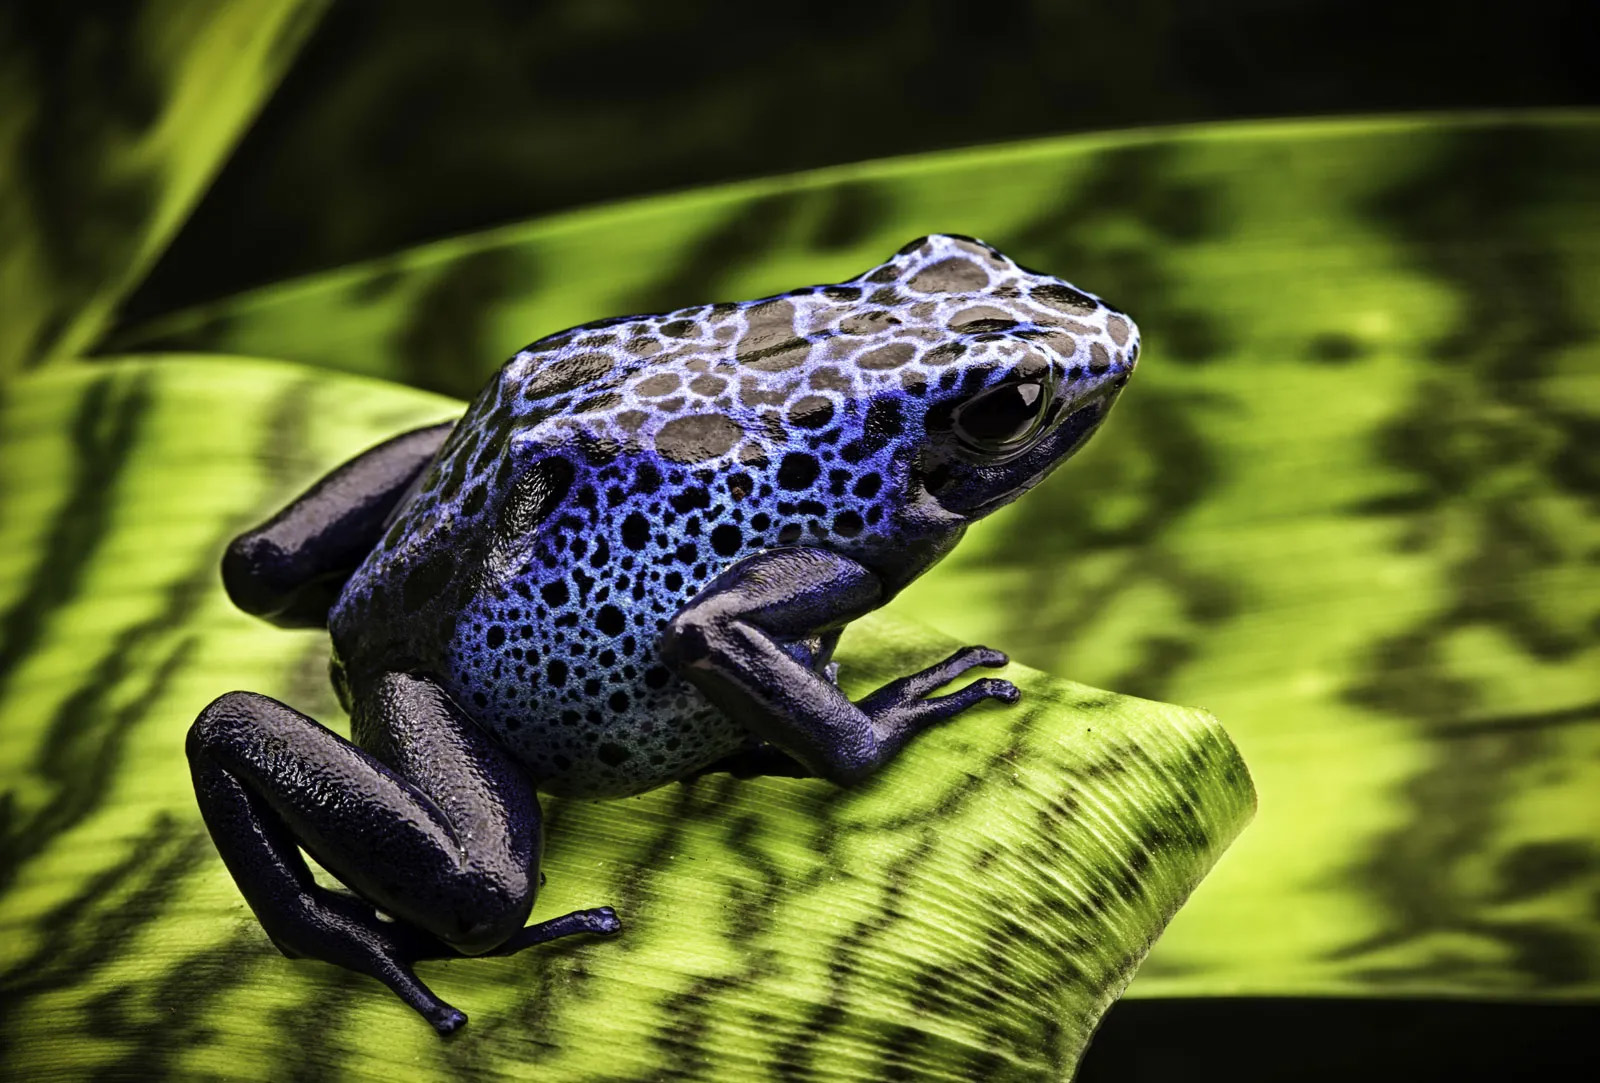 25 interesting facts about Frogs